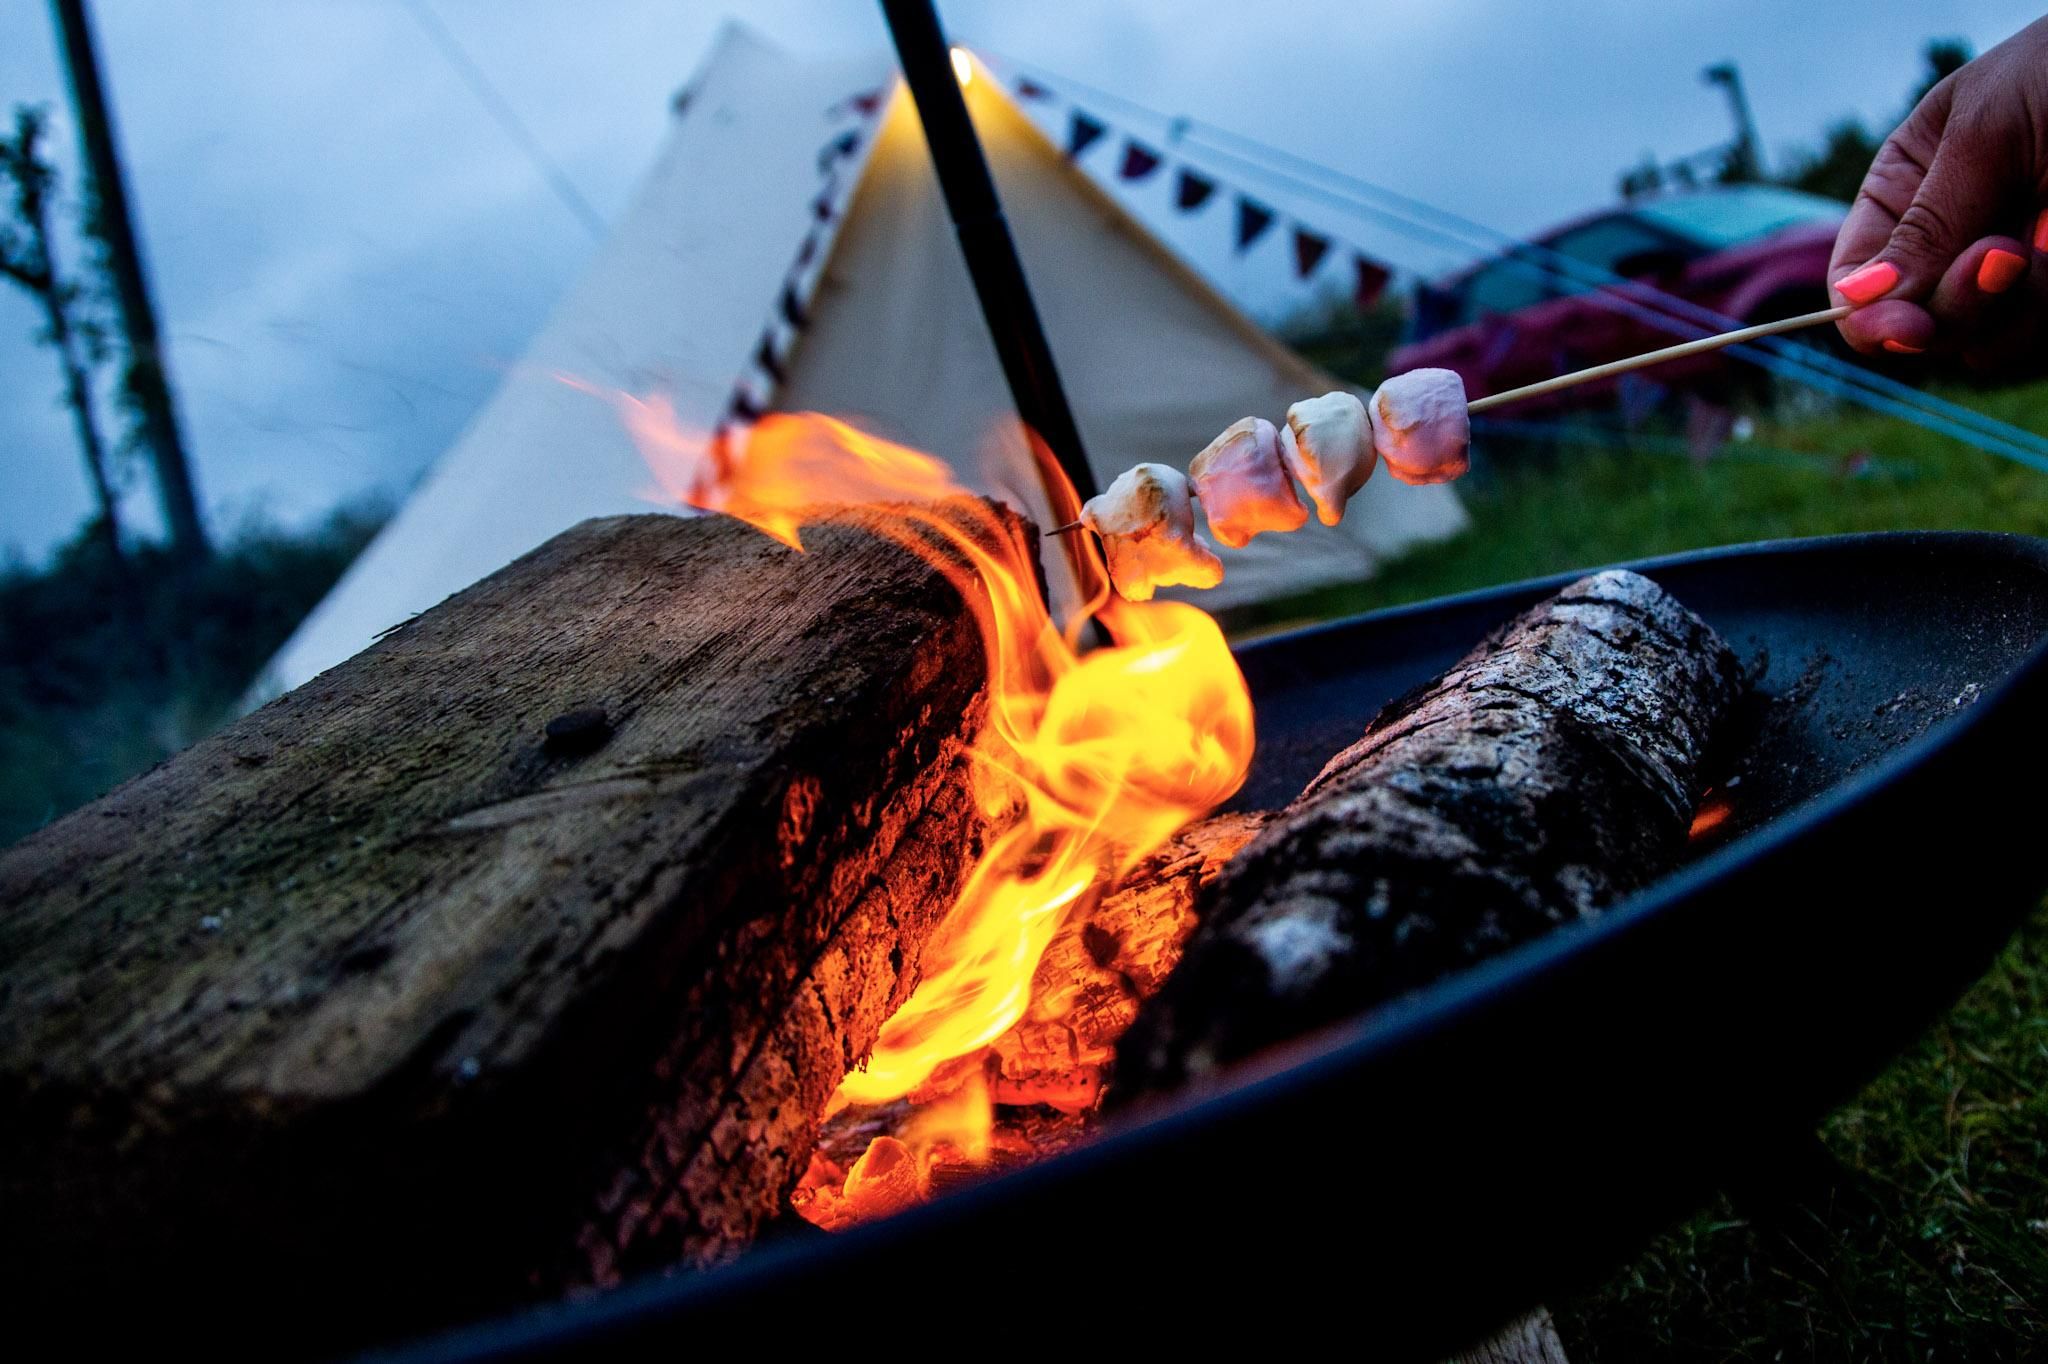 Norfolk Camping: Campfires & BBQs Welcome